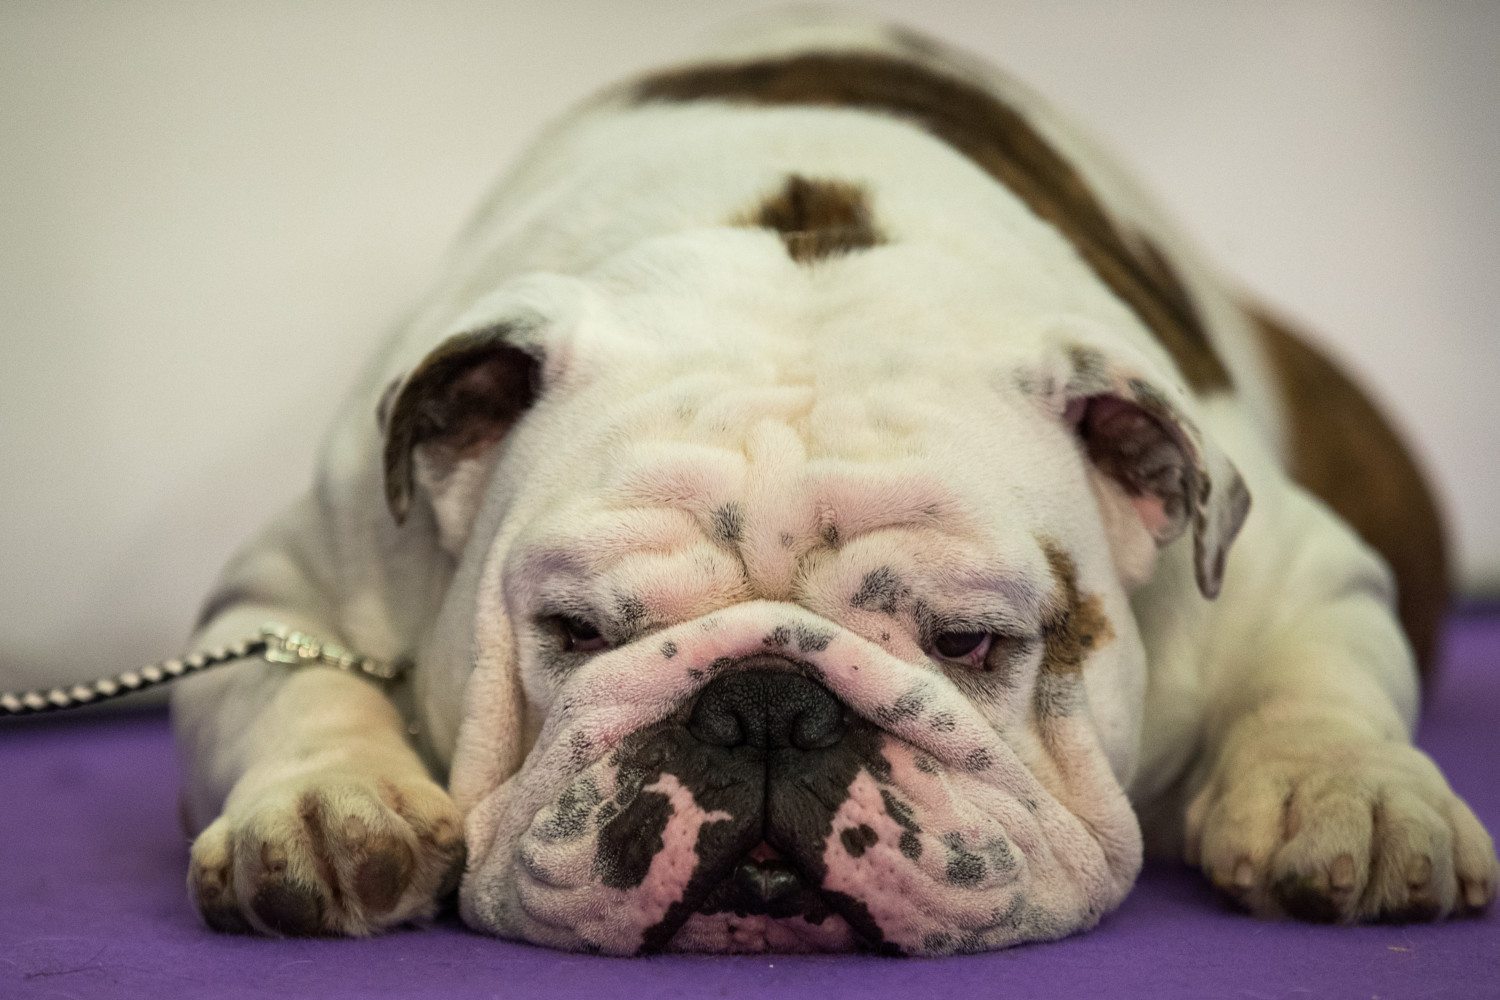 Canine Champions Compete In The Westminster Dog Show